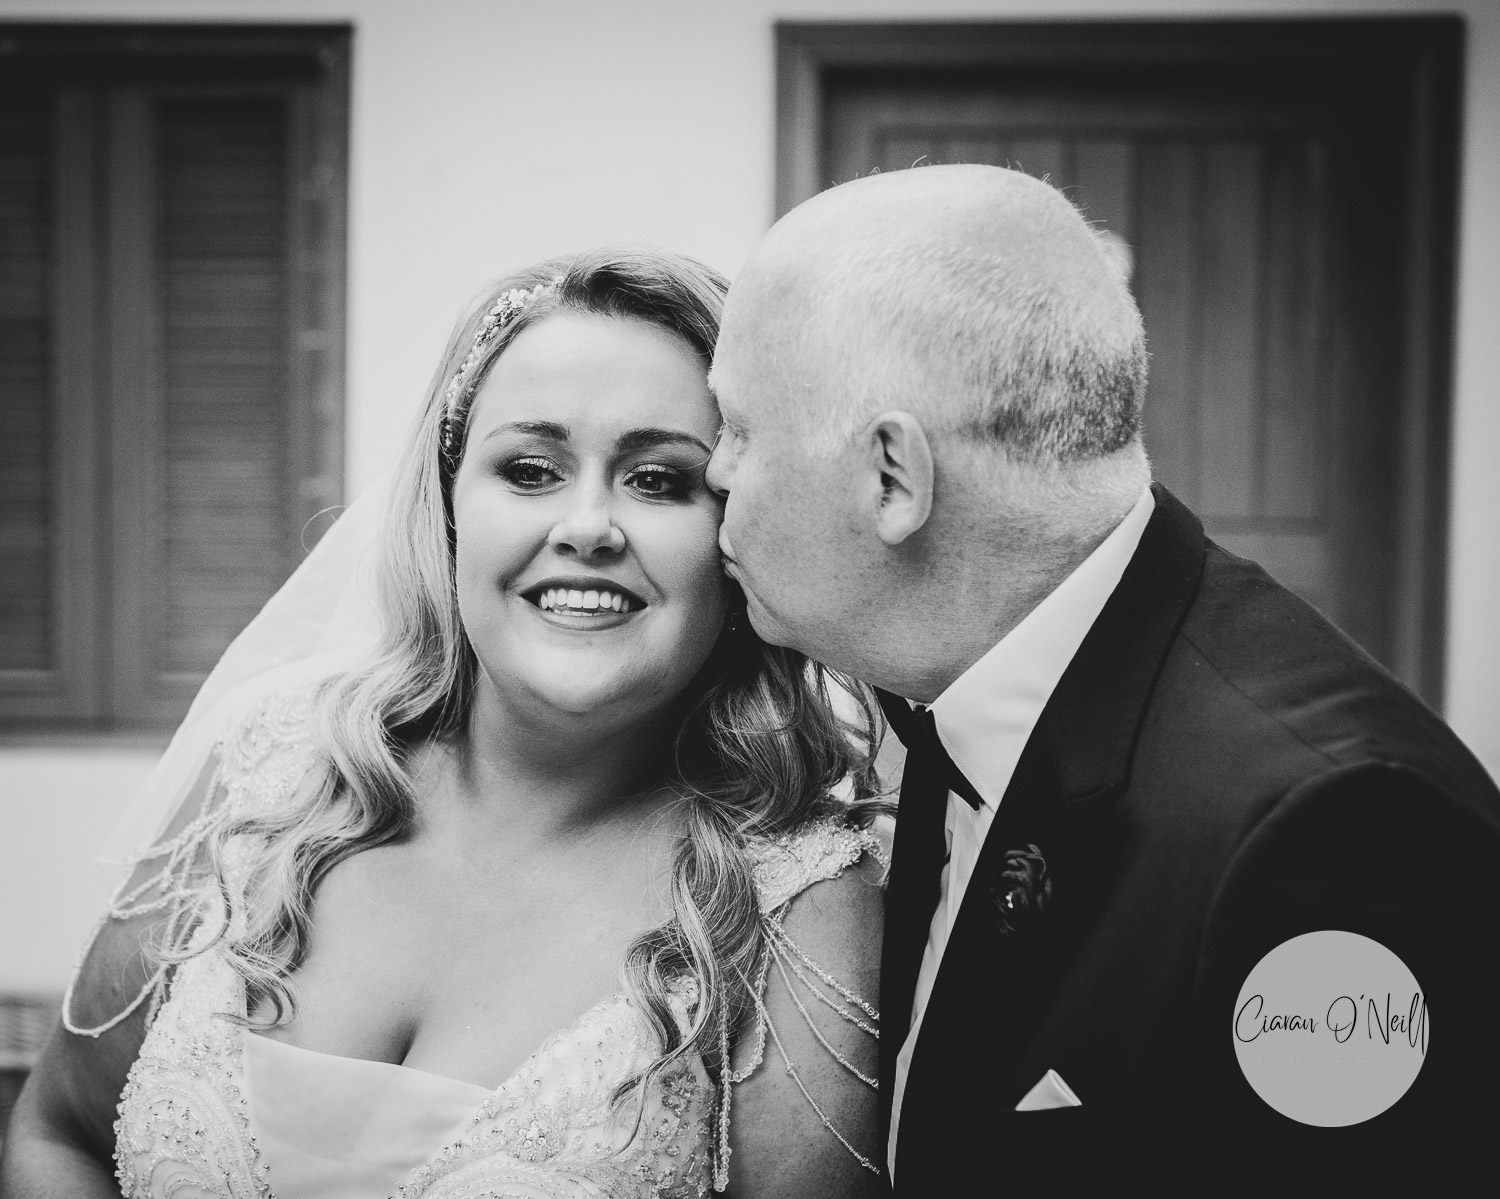 Dad and bride share a wee kiss on the cheeks before she walks down the aisle